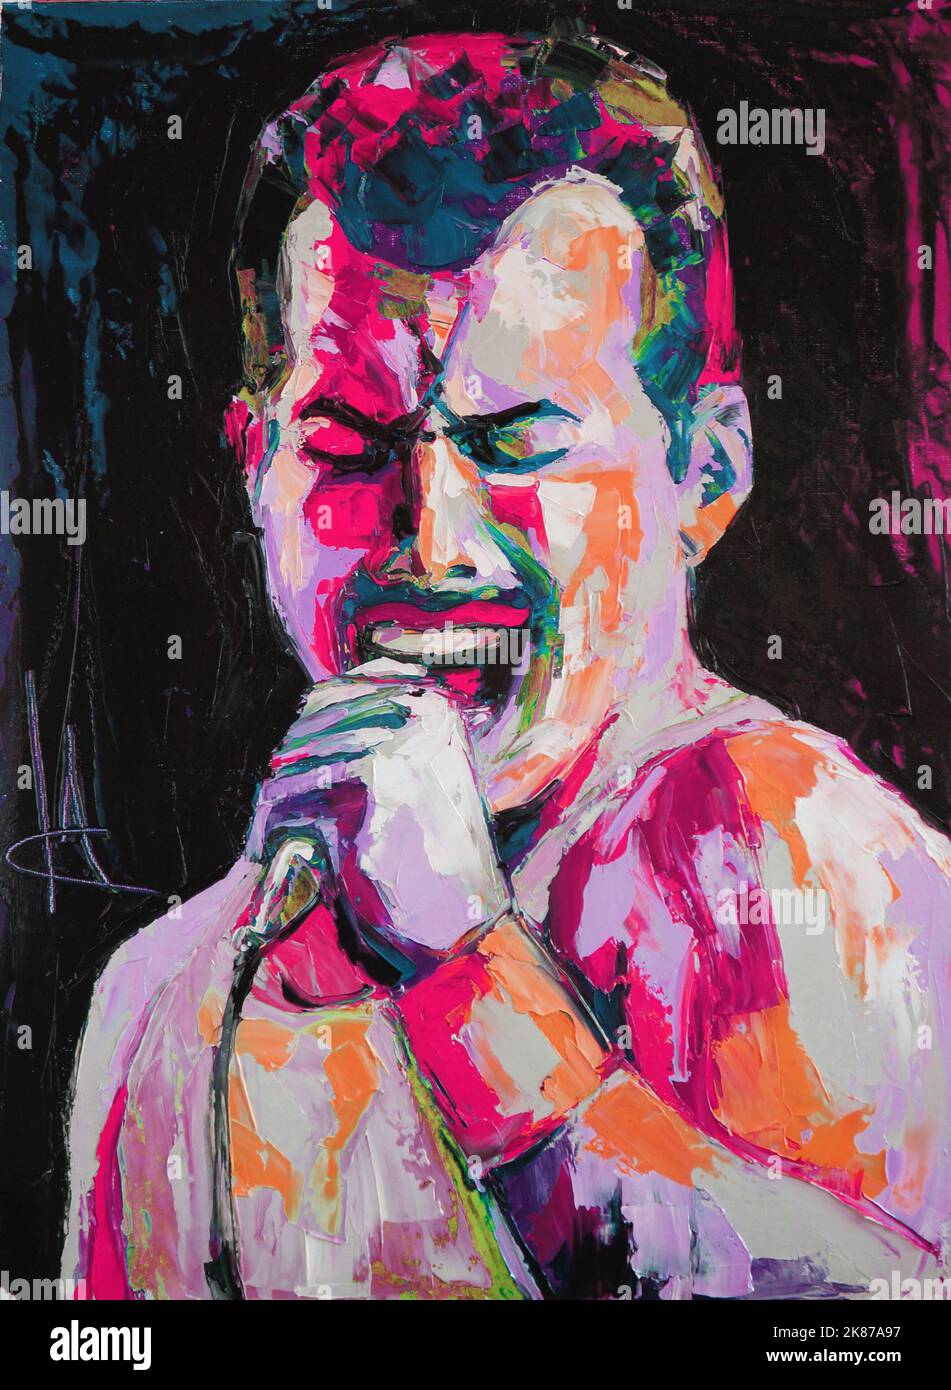 Oil portrait painting in multicolored tones. Portrait of singing Freddie Mercury. Conceptual closeup of an oil painting and palette knife on canvas. Stock Photo